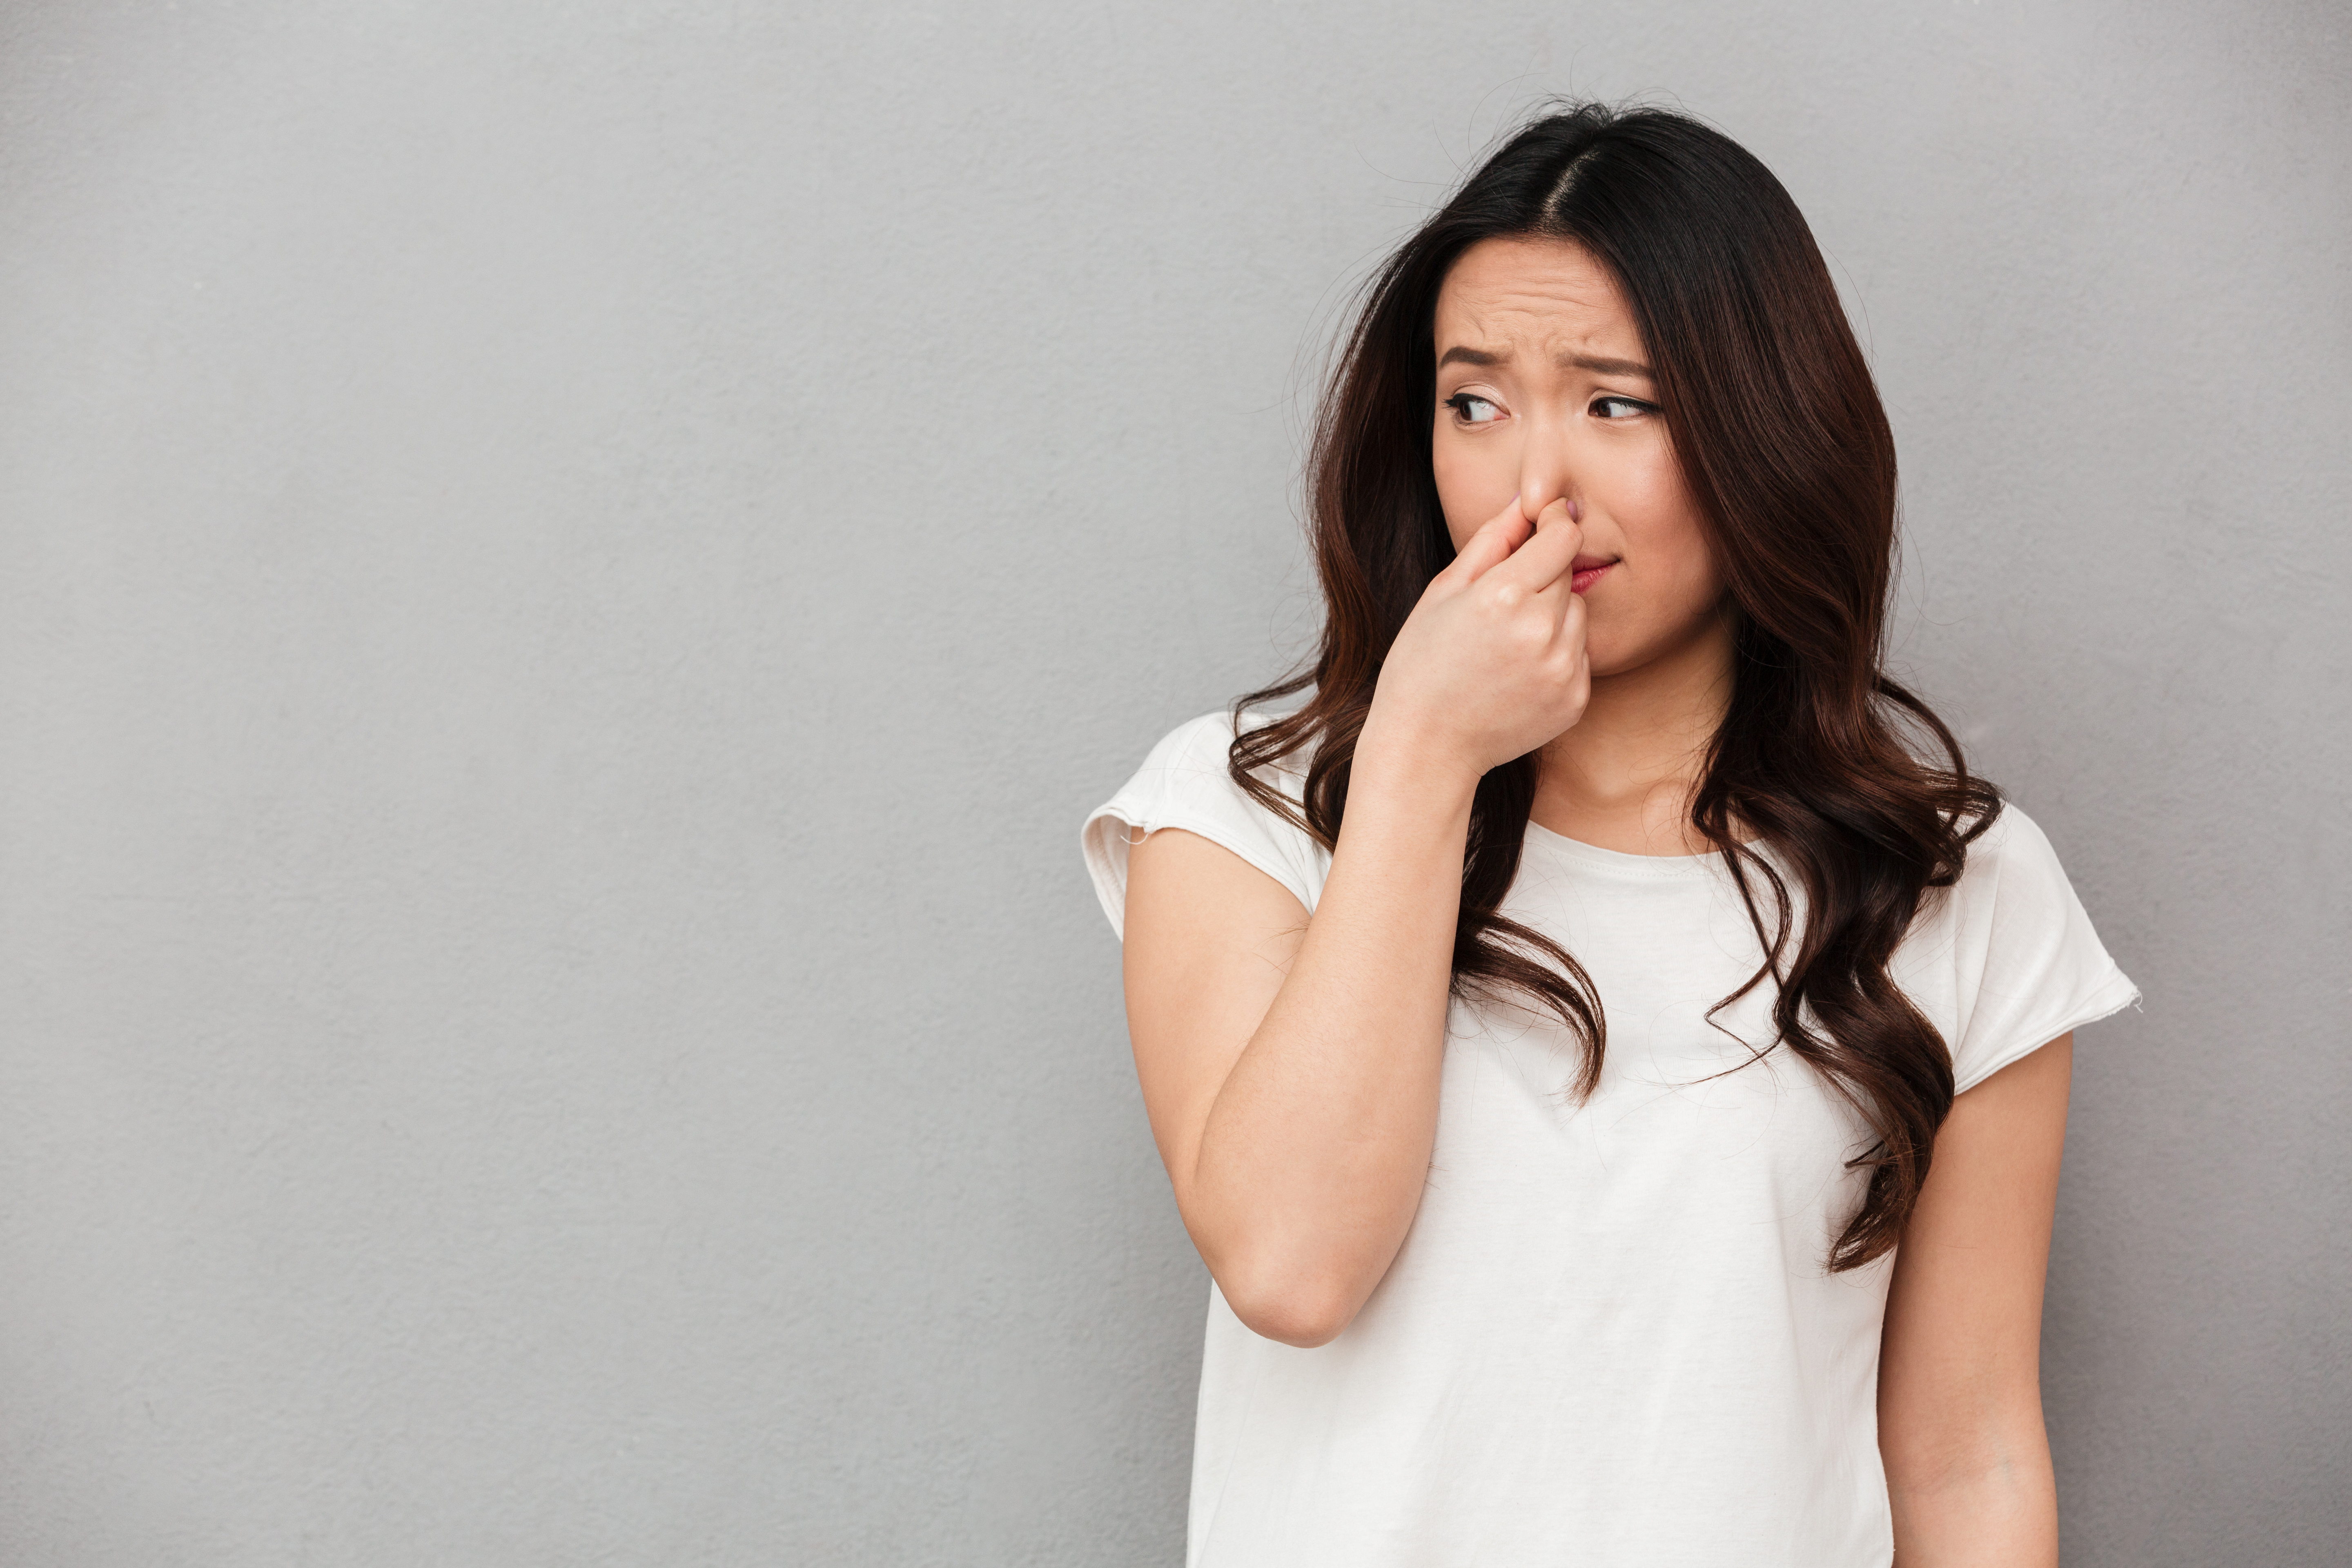 A woman pinching her nose | Source: Pexels